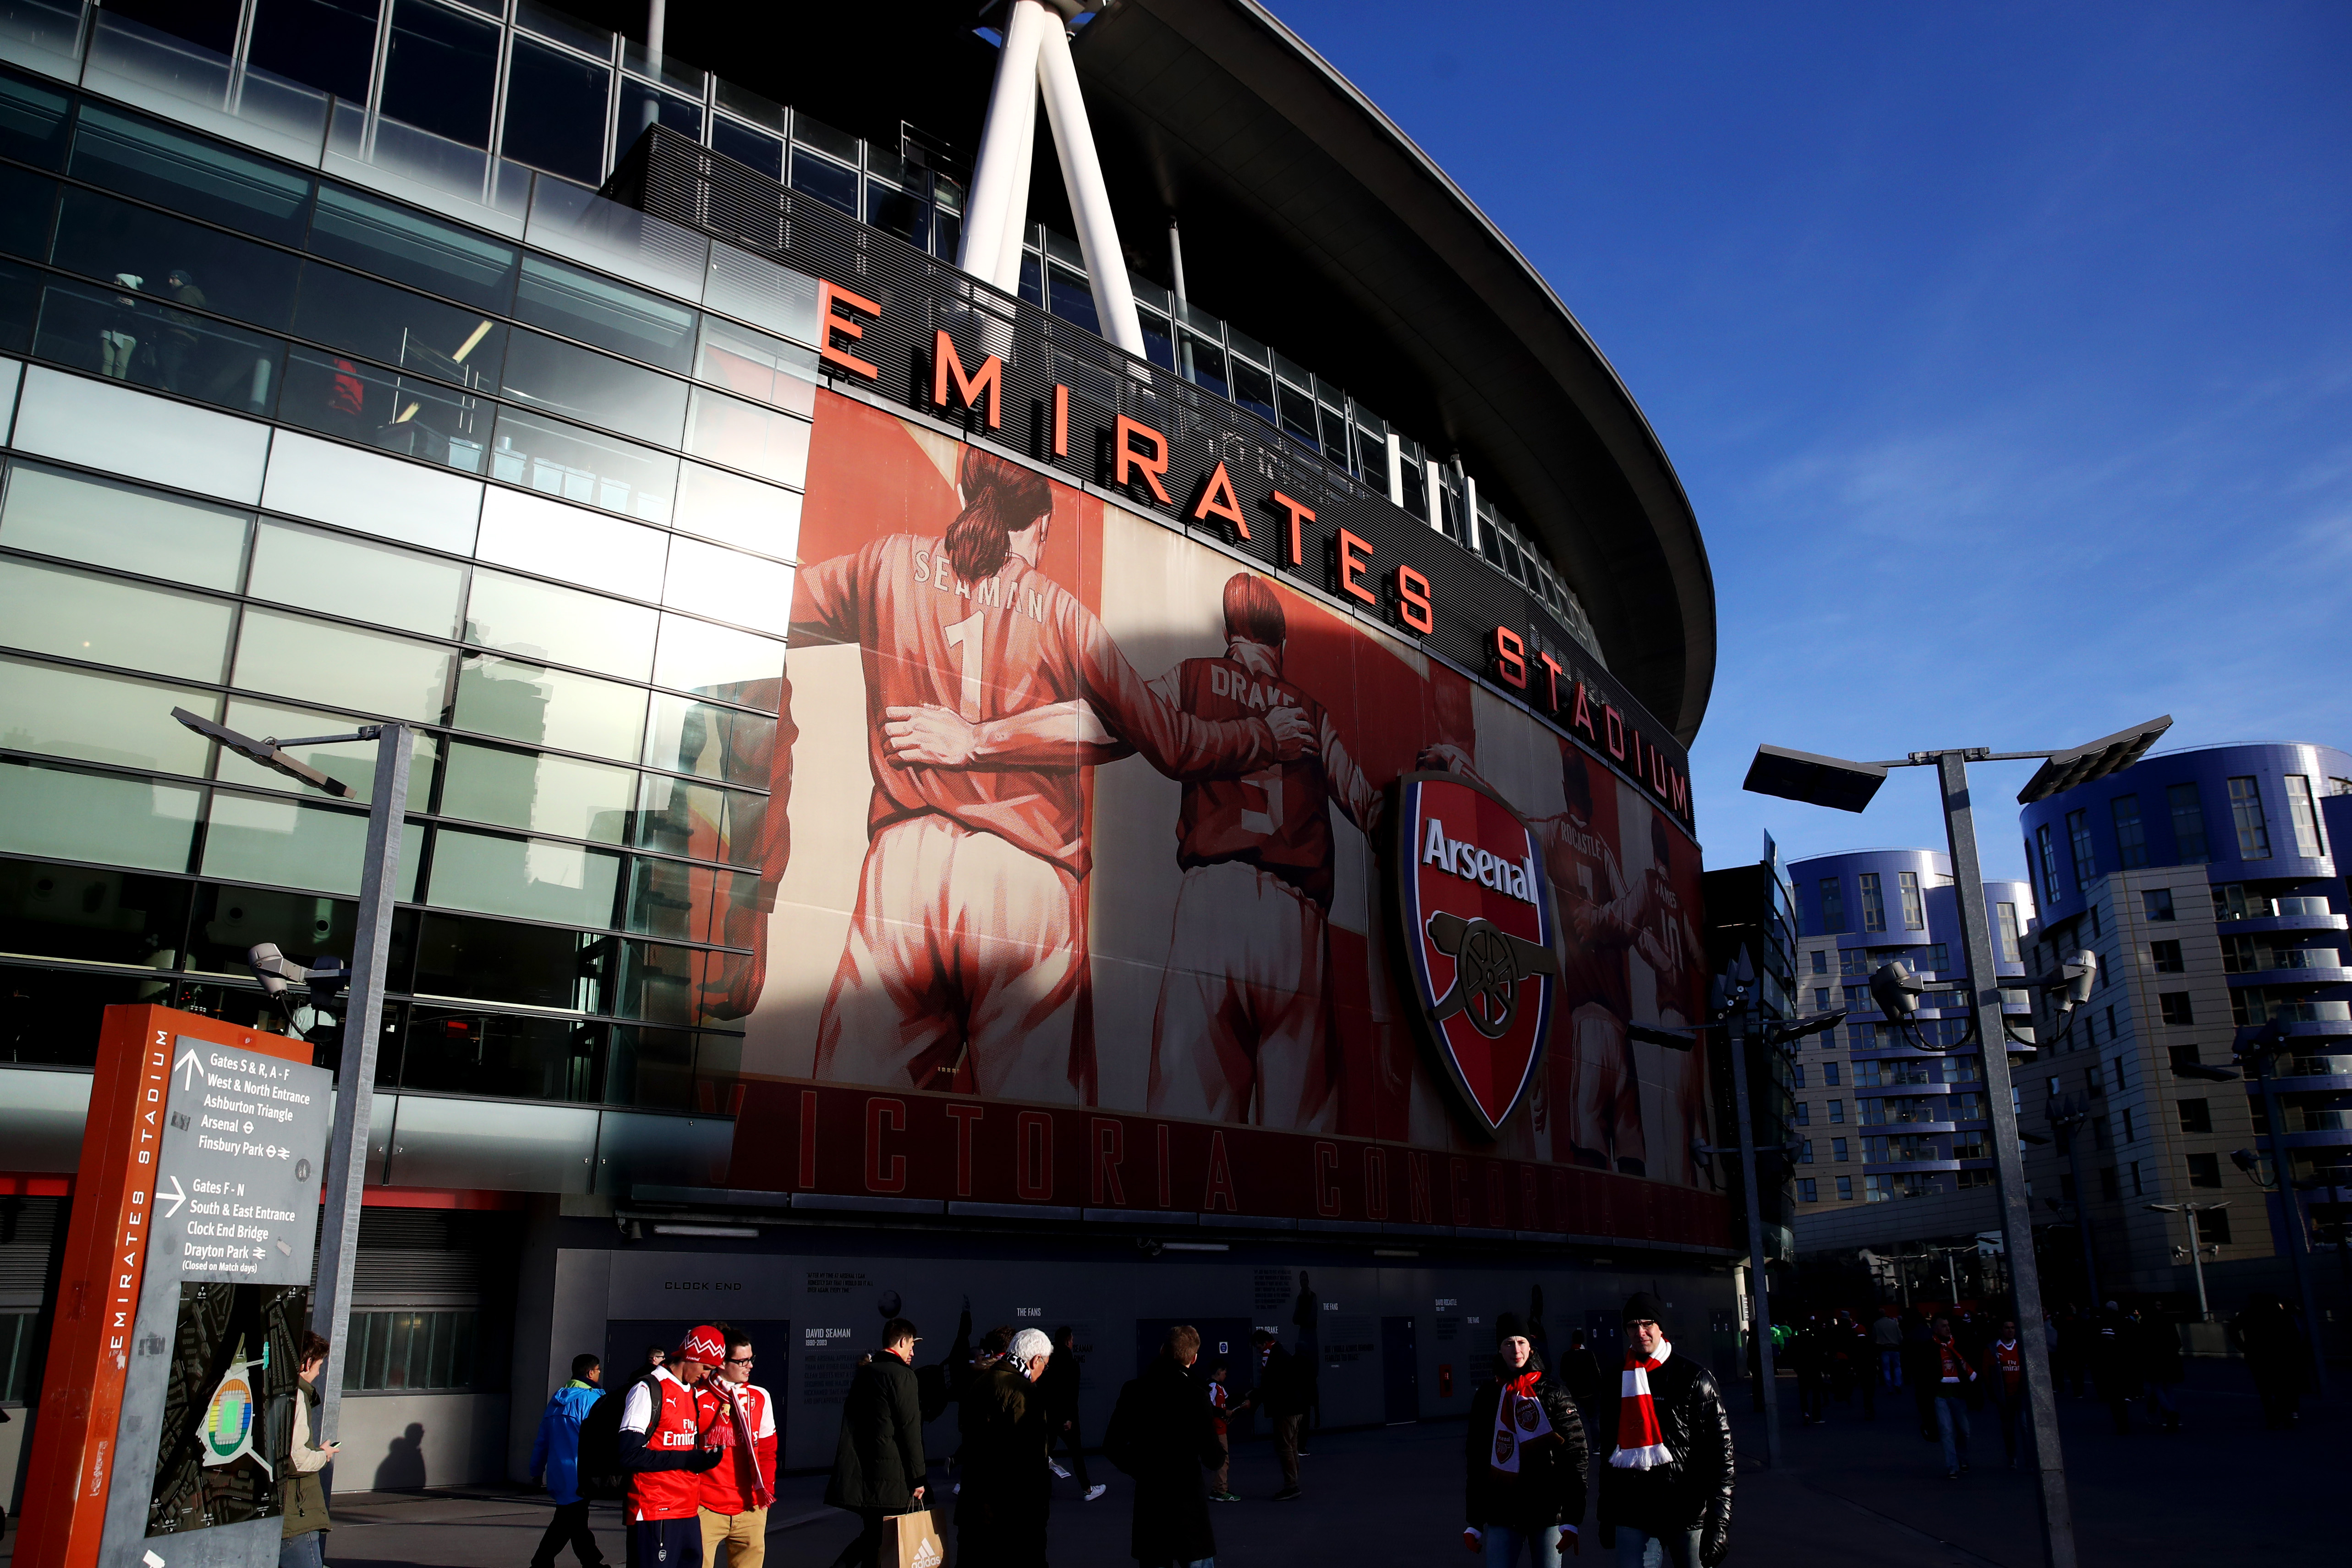 LONDON, ENGLAND - DECEMBER 26:  Fans arrive at the stadium for the Premier League match between Arsenal and West Bromwich Albion at Emirates Stadium on December 26, 2016 in London, England.  (Photo by Julian Finney/Getty Images)